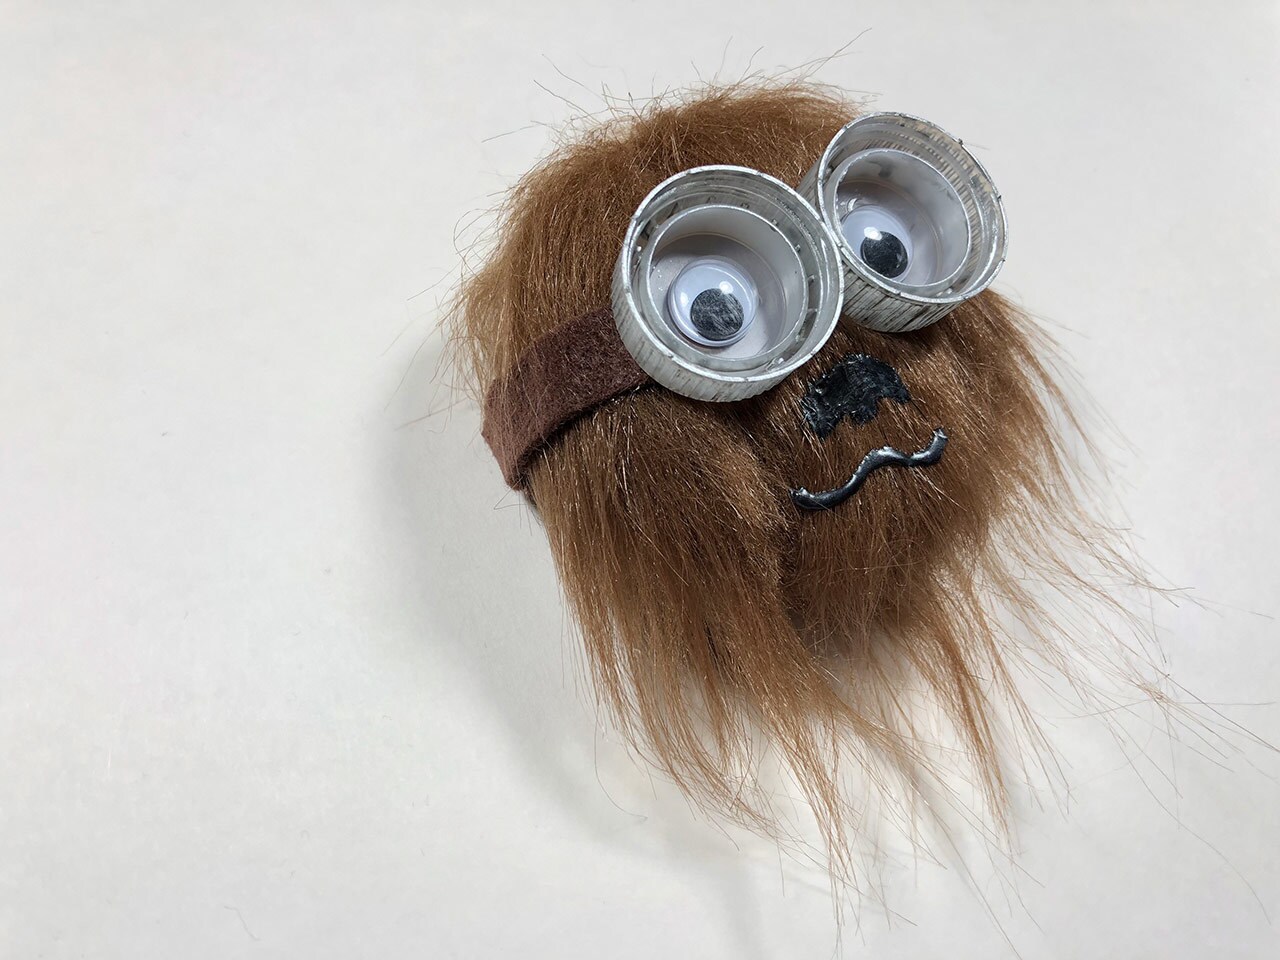 A DIY paperweight made to look like Chewbacca.